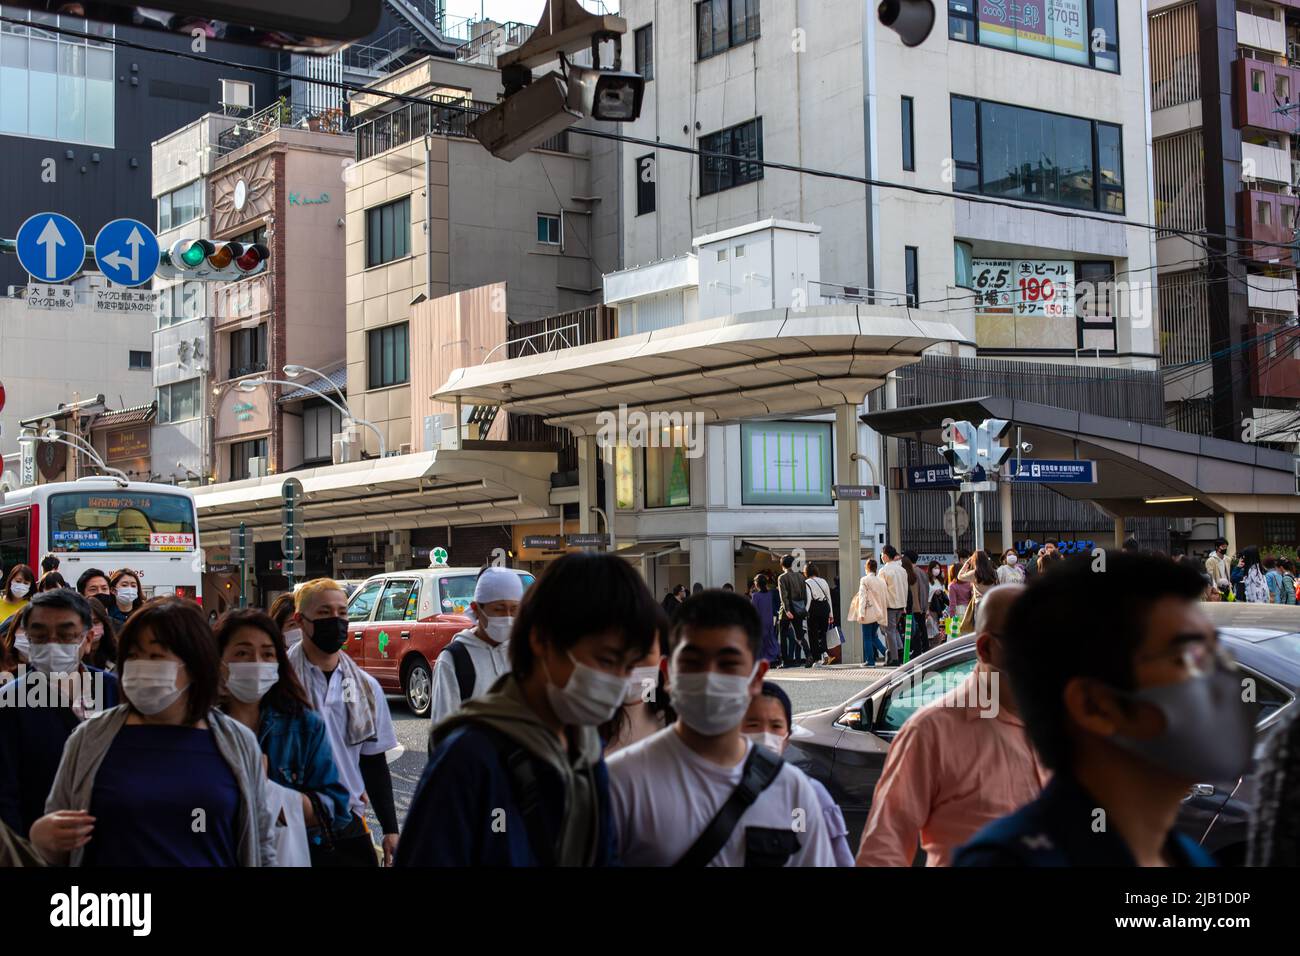 Kawaramachi dori Street near the Kyoto-Kawaramachi Station and crowd of people in motion. People wears face mask to prevent the spread of COVID-19 Stock Photo